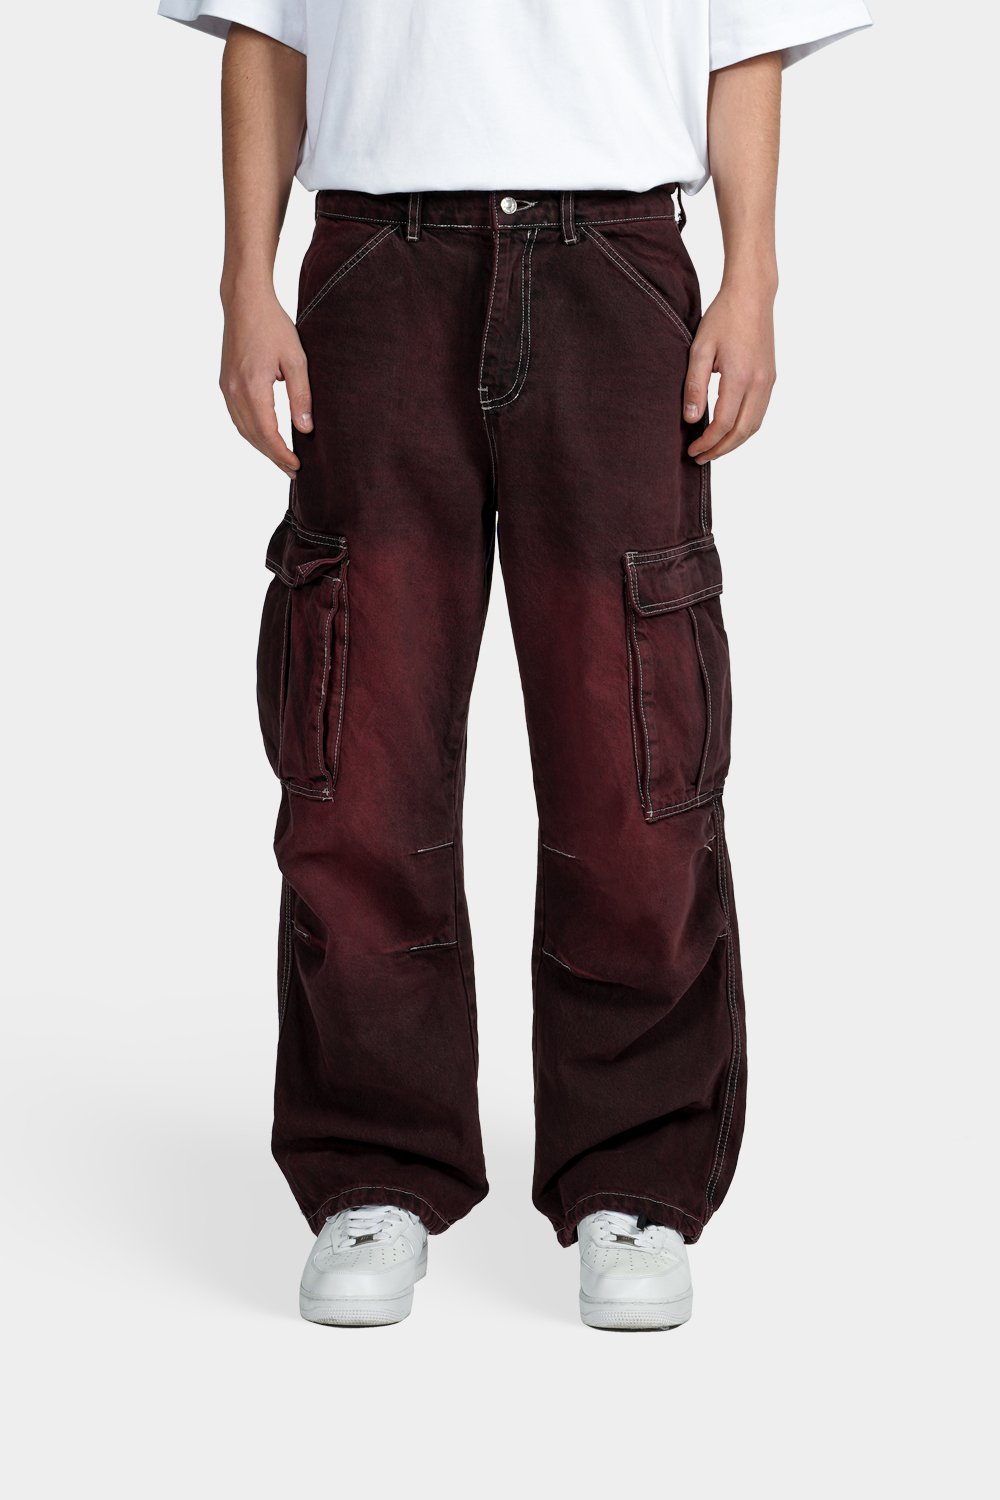 Fixed Waist Red Tint Cargo Jeans (URBN-B-51)